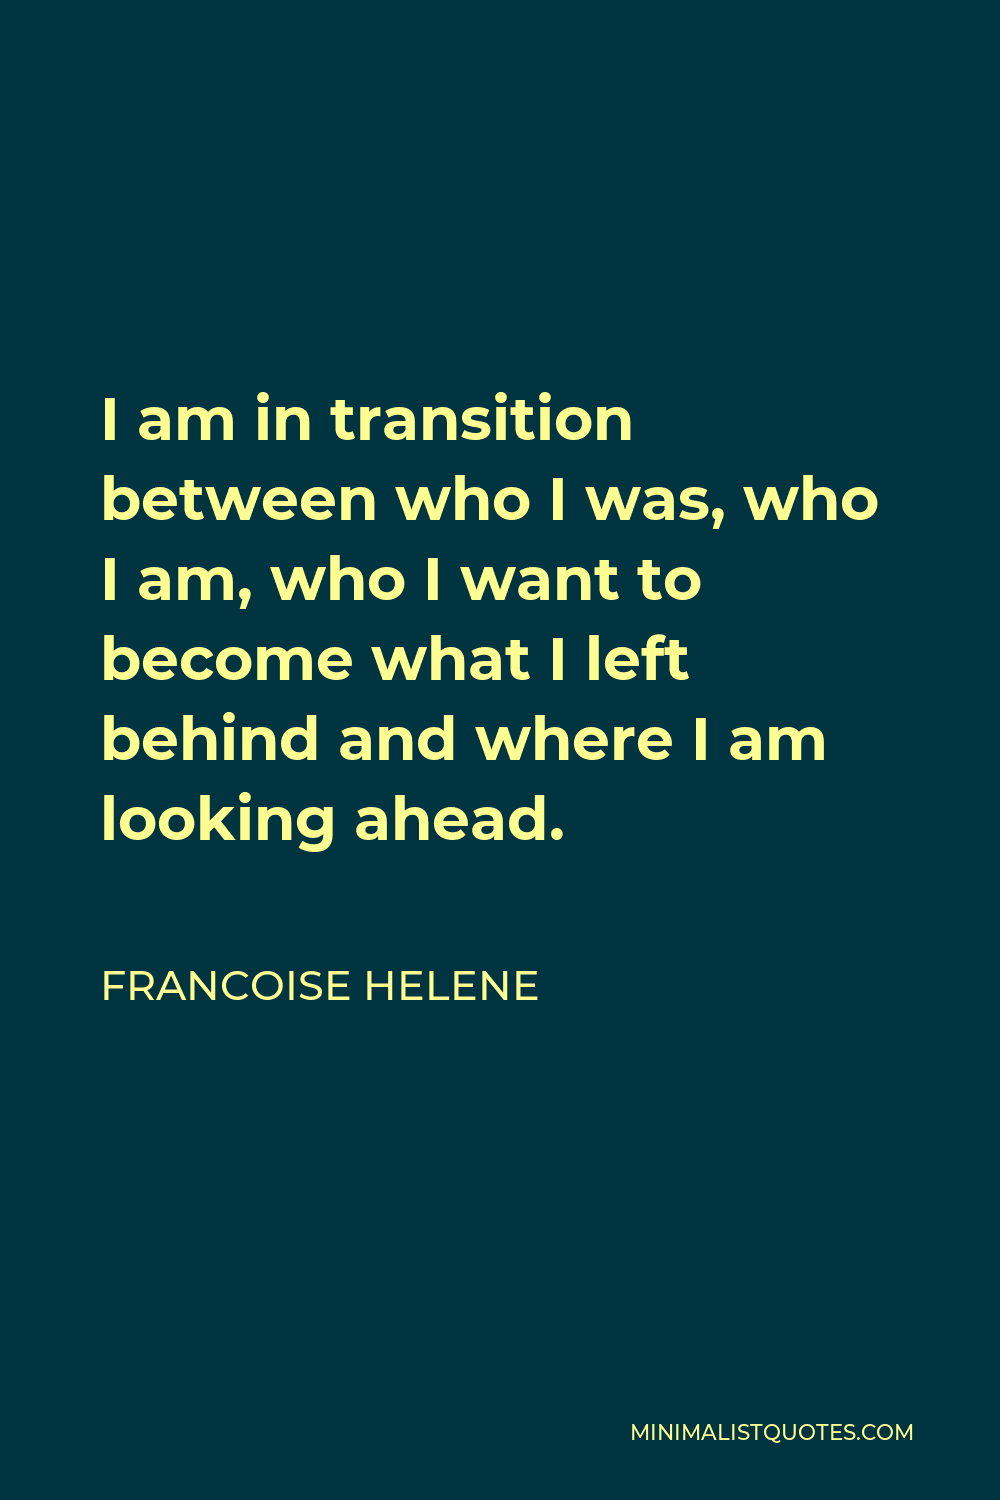 Francoise Helene Quote - I am in transition between who I was, who I am, who I want to become what I left behind and where I am looking ahead.